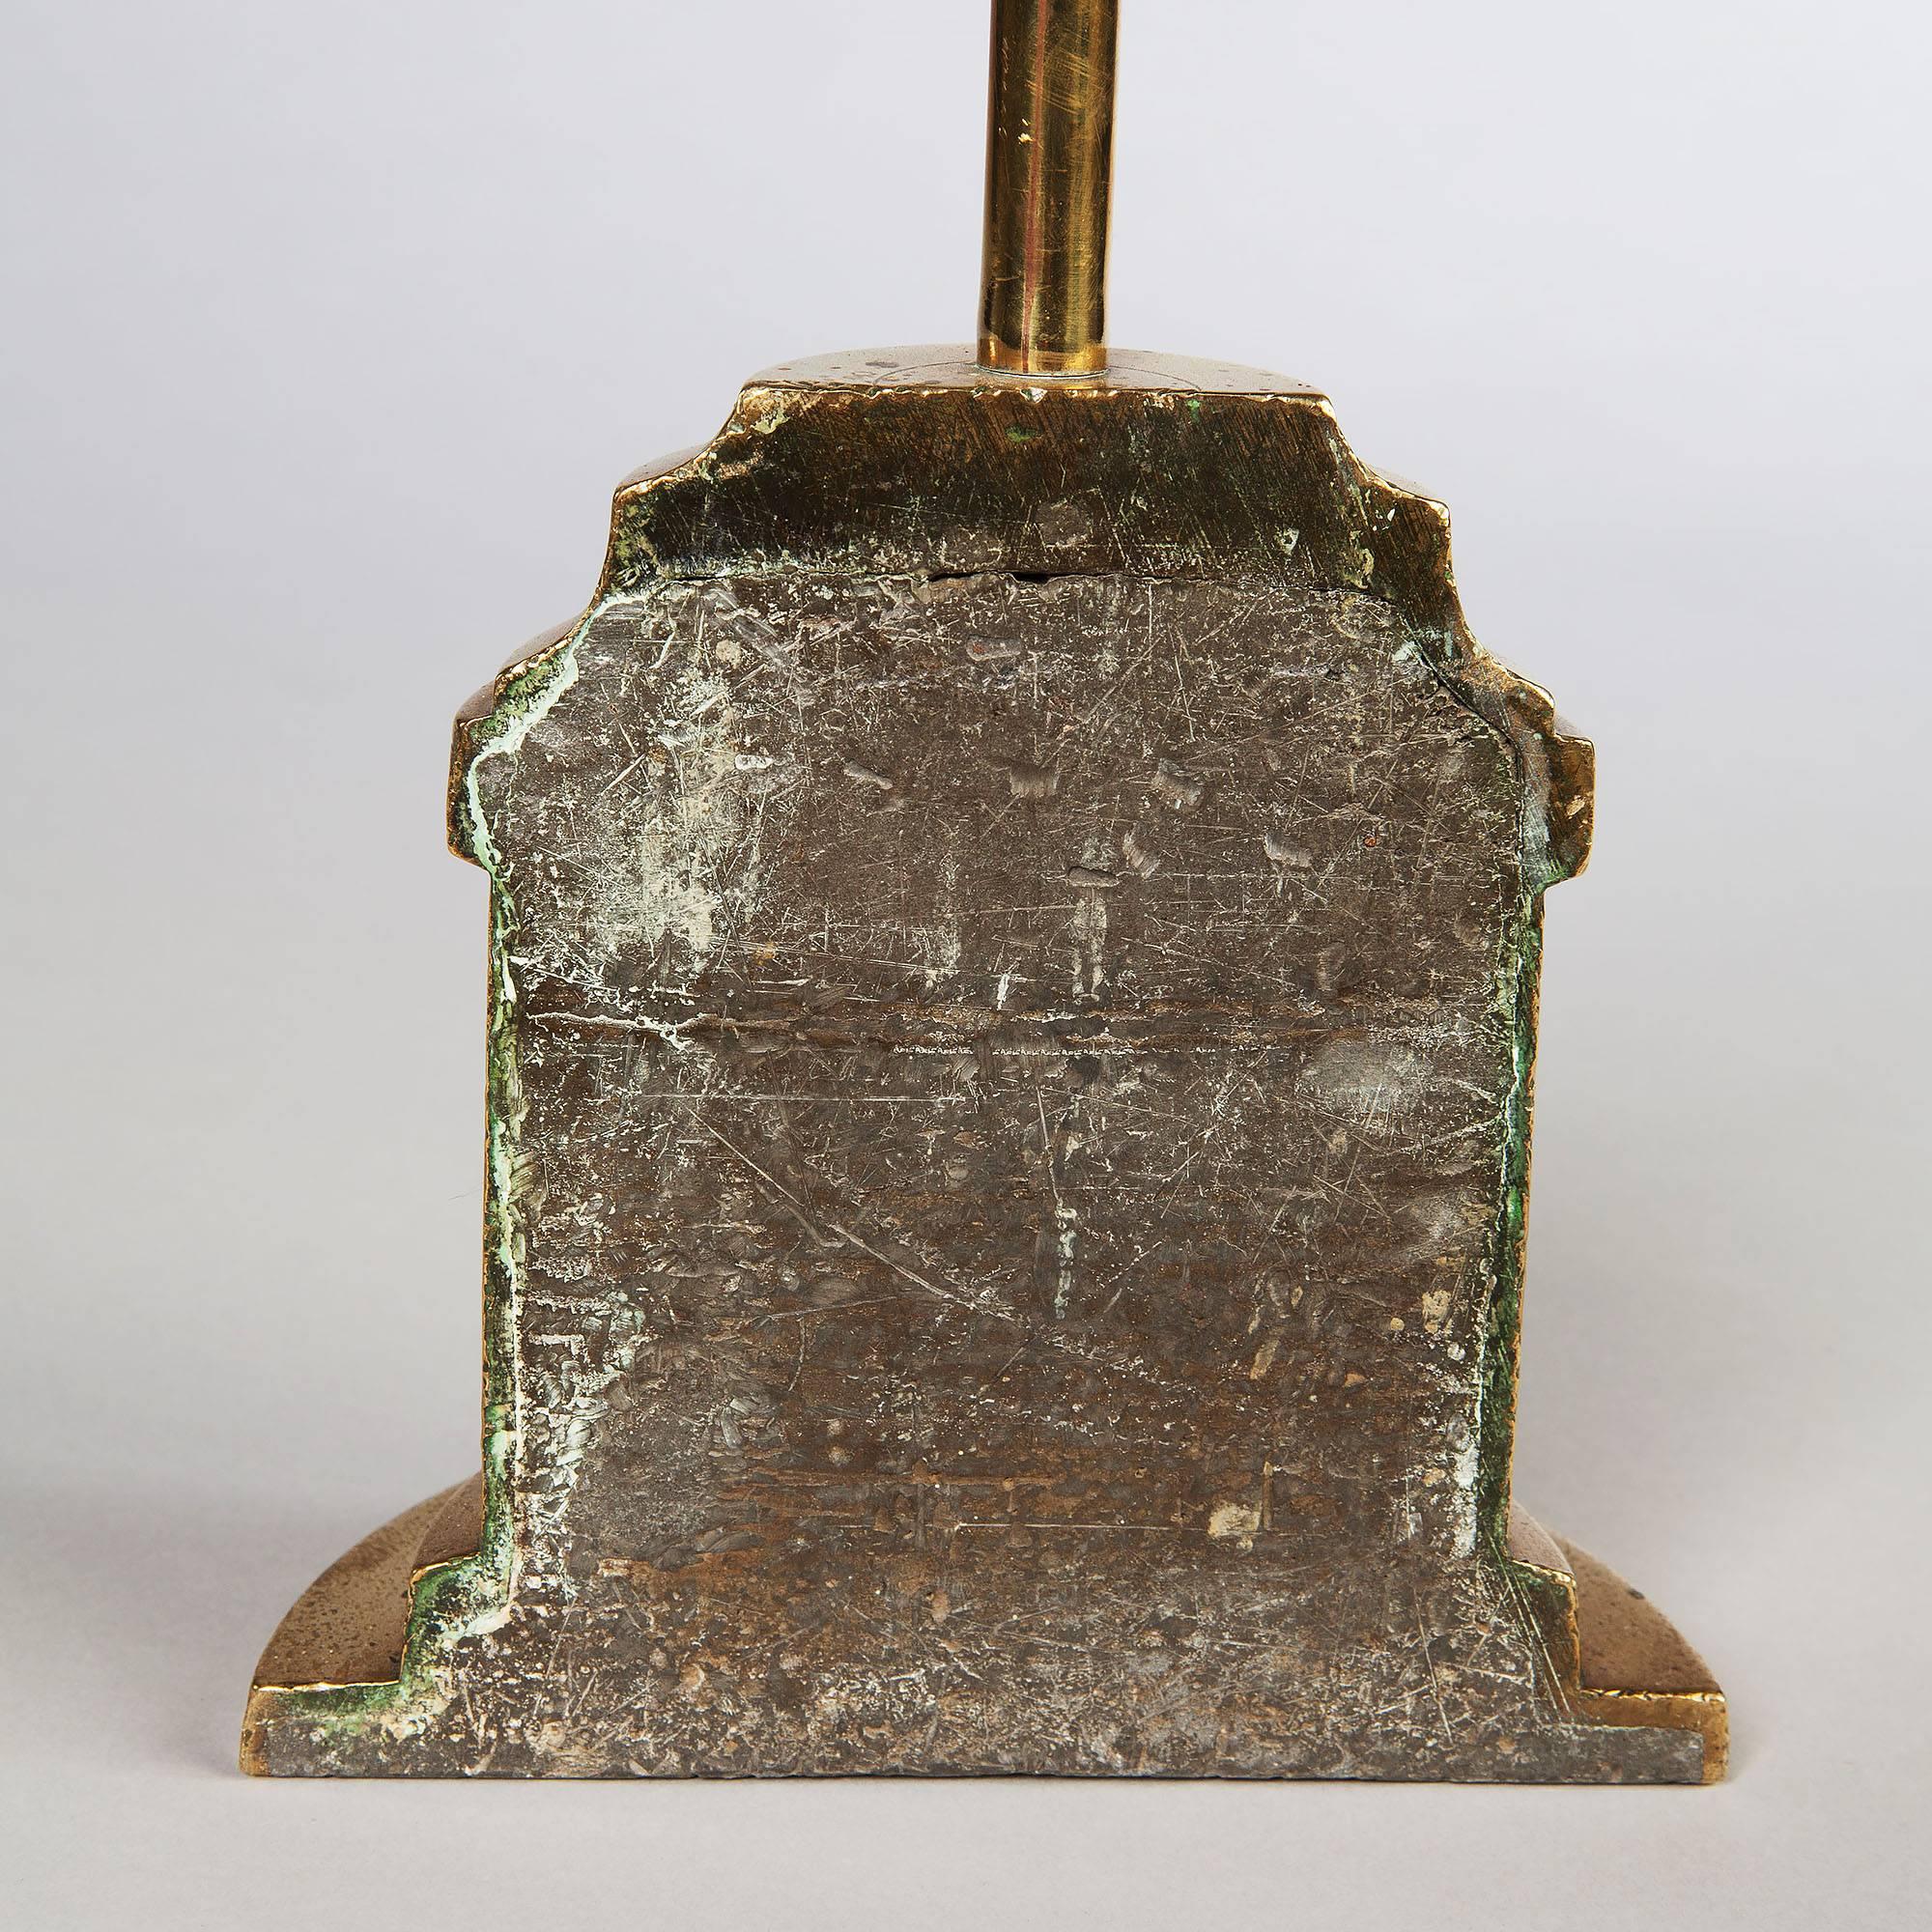 England, circa 1810.

A Regency overscale tall brass dado rail height door stop. The tall brass stem has an oval ring handle above a half bell shaped base - weighted with lead. 

Measures: Height 29 in (74 cm).